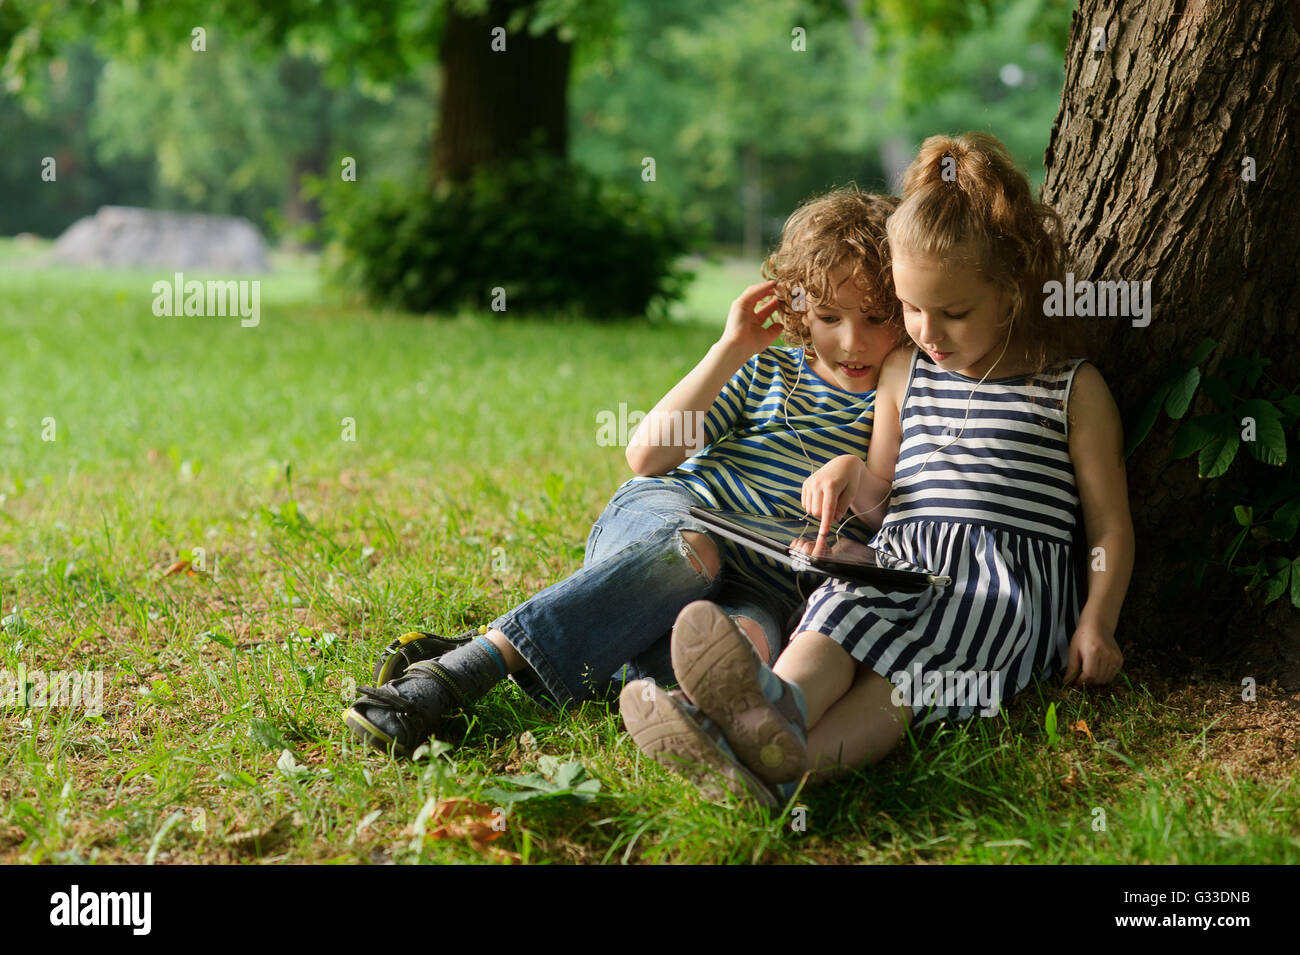 Boy and girl of 8-9 years sit on a grass in park with the small laptop. Children with interest look at the screen. Stock Photo